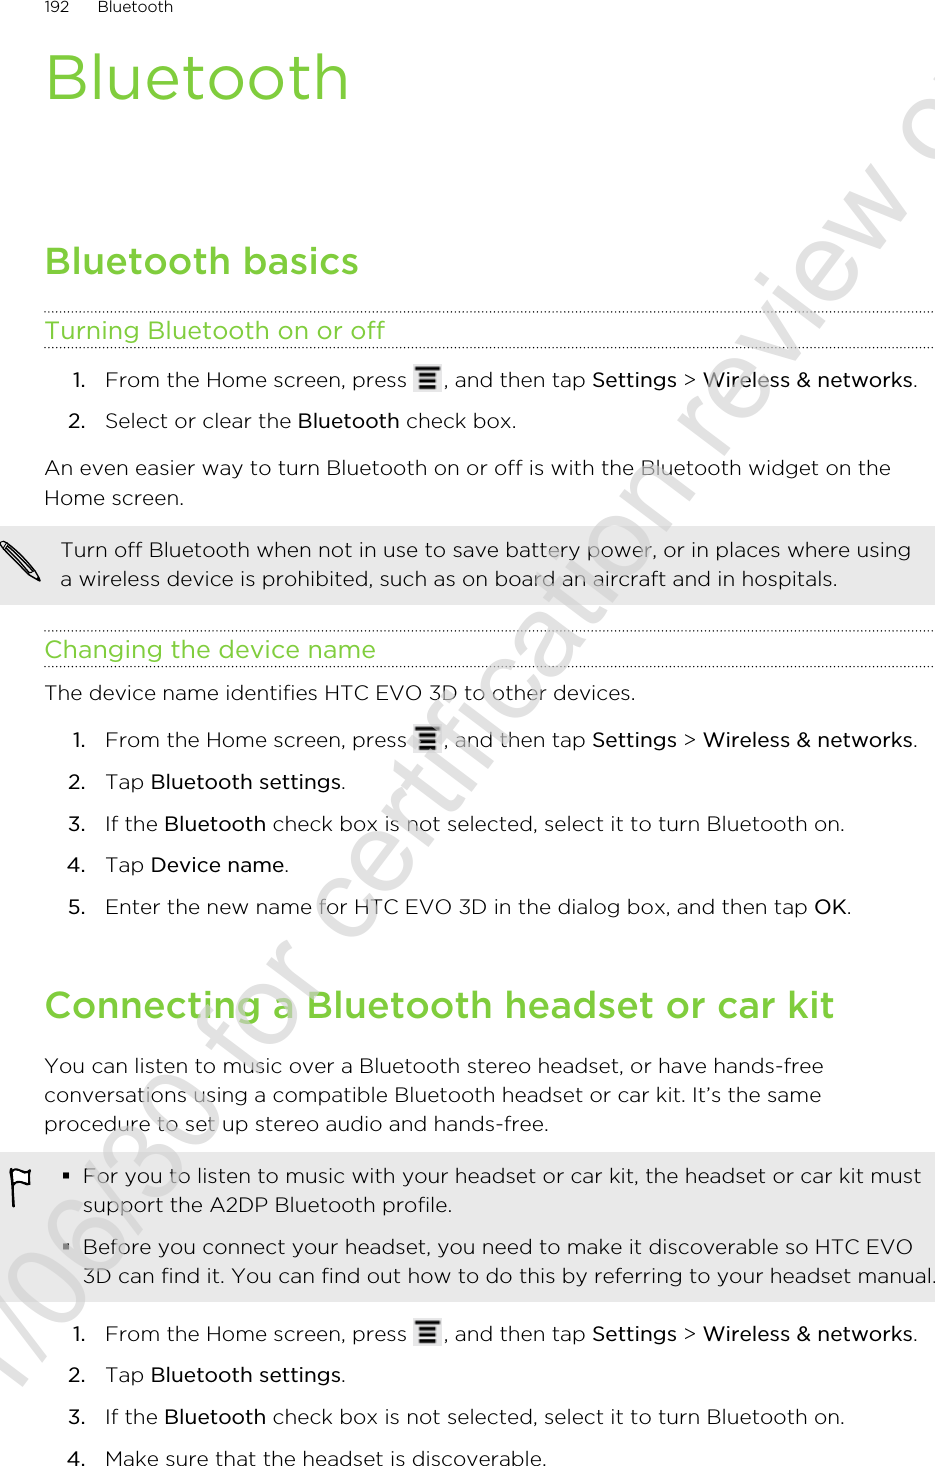 BluetoothBluetooth basicsTurning Bluetooth on or off1. From the Home screen, press  , and then tap Settings &gt; Wireless &amp; networks.2. Select or clear the Bluetooth check box.An even easier way to turn Bluetooth on or off is with the Bluetooth widget on theHome screen.Turn off Bluetooth when not in use to save battery power, or in places where usinga wireless device is prohibited, such as on board an aircraft and in hospitals.Changing the device nameThe device name identifies HTC EVO 3D to other devices.1. From the Home screen, press  , and then tap Settings &gt; Wireless &amp; networks.2. Tap Bluetooth settings.3. If the Bluetooth check box is not selected, select it to turn Bluetooth on.4. Tap Device name.5. Enter the new name for HTC EVO 3D in the dialog box, and then tap OK.Connecting a Bluetooth headset or car kitYou can listen to music over a Bluetooth stereo headset, or have hands-freeconversations using a compatible Bluetooth headset or car kit. It’s the sameprocedure to set up stereo audio and hands-free.§For you to listen to music with your headset or car kit, the headset or car kit mustsupport the A2DP Bluetooth profile.§Before you connect your headset, you need to make it discoverable so HTC EVO3D can find it. You can find out how to do this by referring to your headset manual.1. From the Home screen, press  , and then tap Settings &gt; Wireless &amp; networks.2. Tap Bluetooth settings.3. If the Bluetooth check box is not selected, select it to turn Bluetooth on.4. Make sure that the headset is discoverable.192 Bluetooth2011/06/30 for certification review only